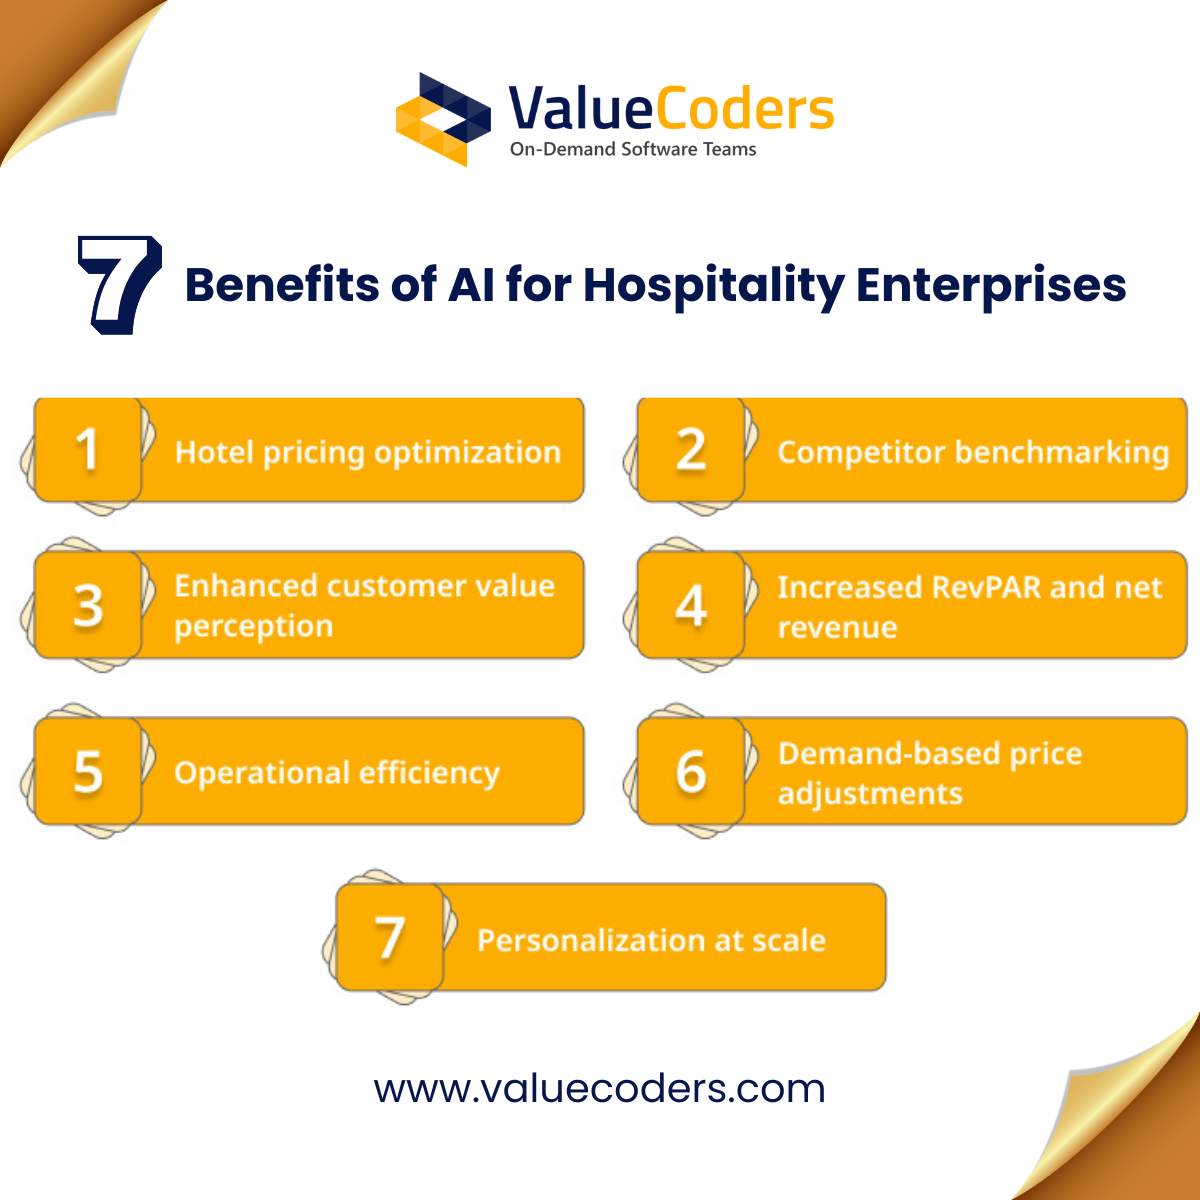 Unlock the power of AI for hotel pricing! 💼🤖 Stay ahead in the market with personalized rates and dynamic adjustments. Boost your profits now! Contact our experts today - valuecoders.com/contact #ArtificialIntelligence #AIinHospitality #HospitalityTech #ValueCoders